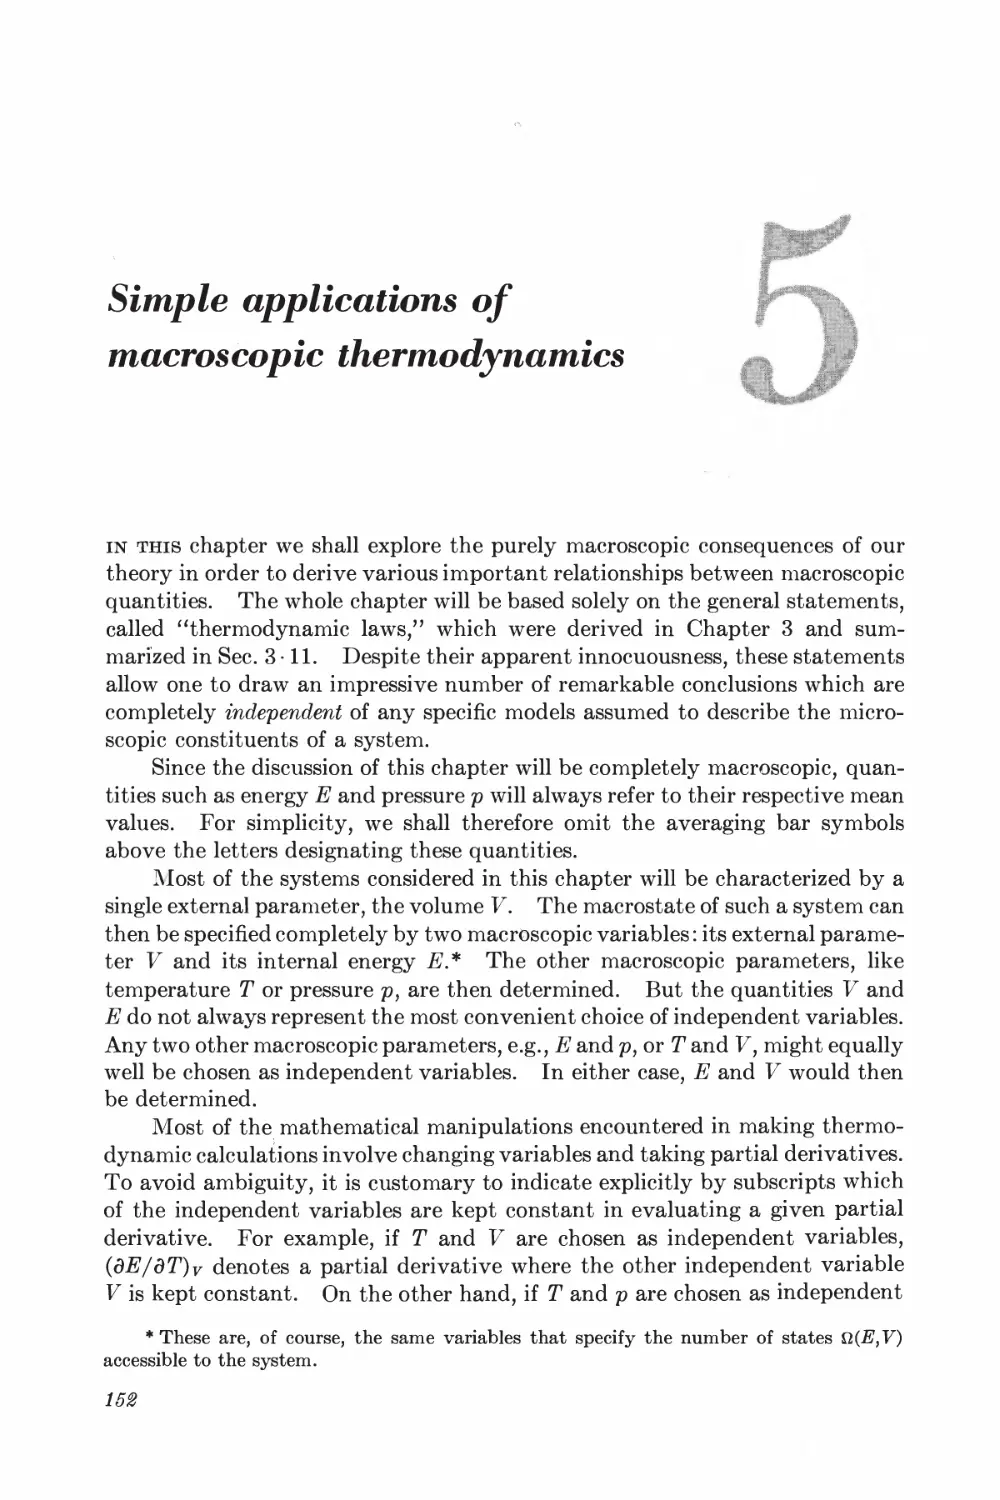 Chapter 5: Simple Applications of Macroscopic Thermodynamics